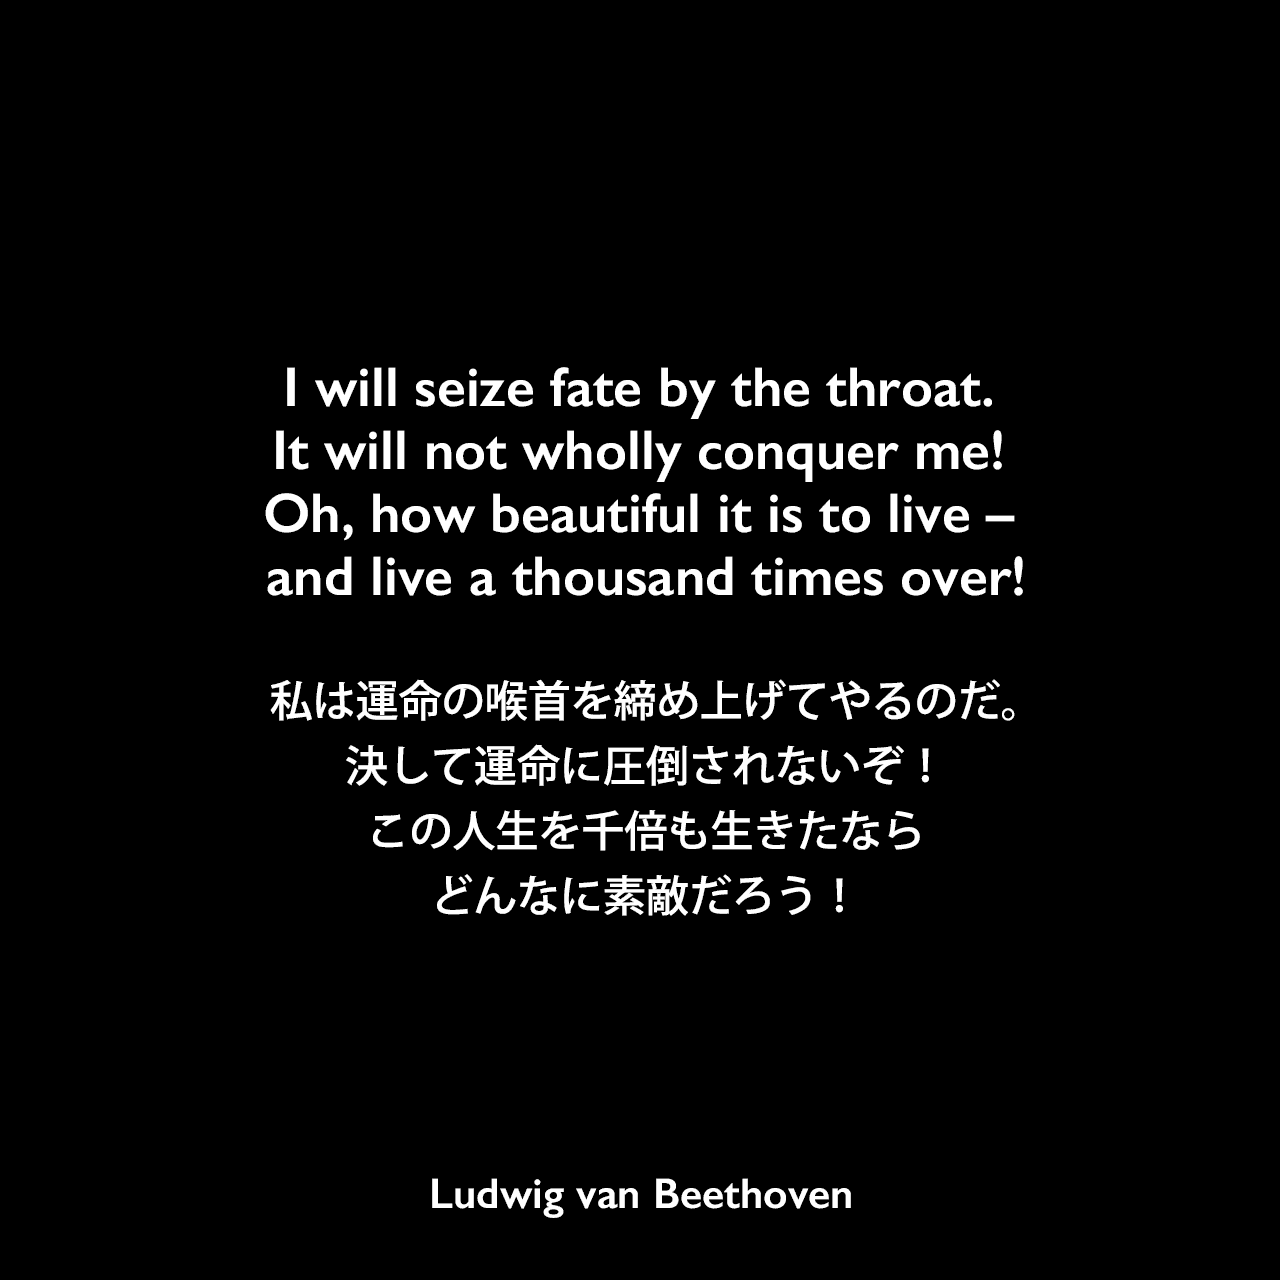 I will seize fate by the throat. It will not wholly conquer me! Oh, how beautiful it is to live – and live a thousand times over!私は運命の喉首を締め上げてやるのだ。決して運命に圧倒されないぞ！この人生を千倍も生きたなら、どんなに素敵だろう！Ludwig van Beethoven